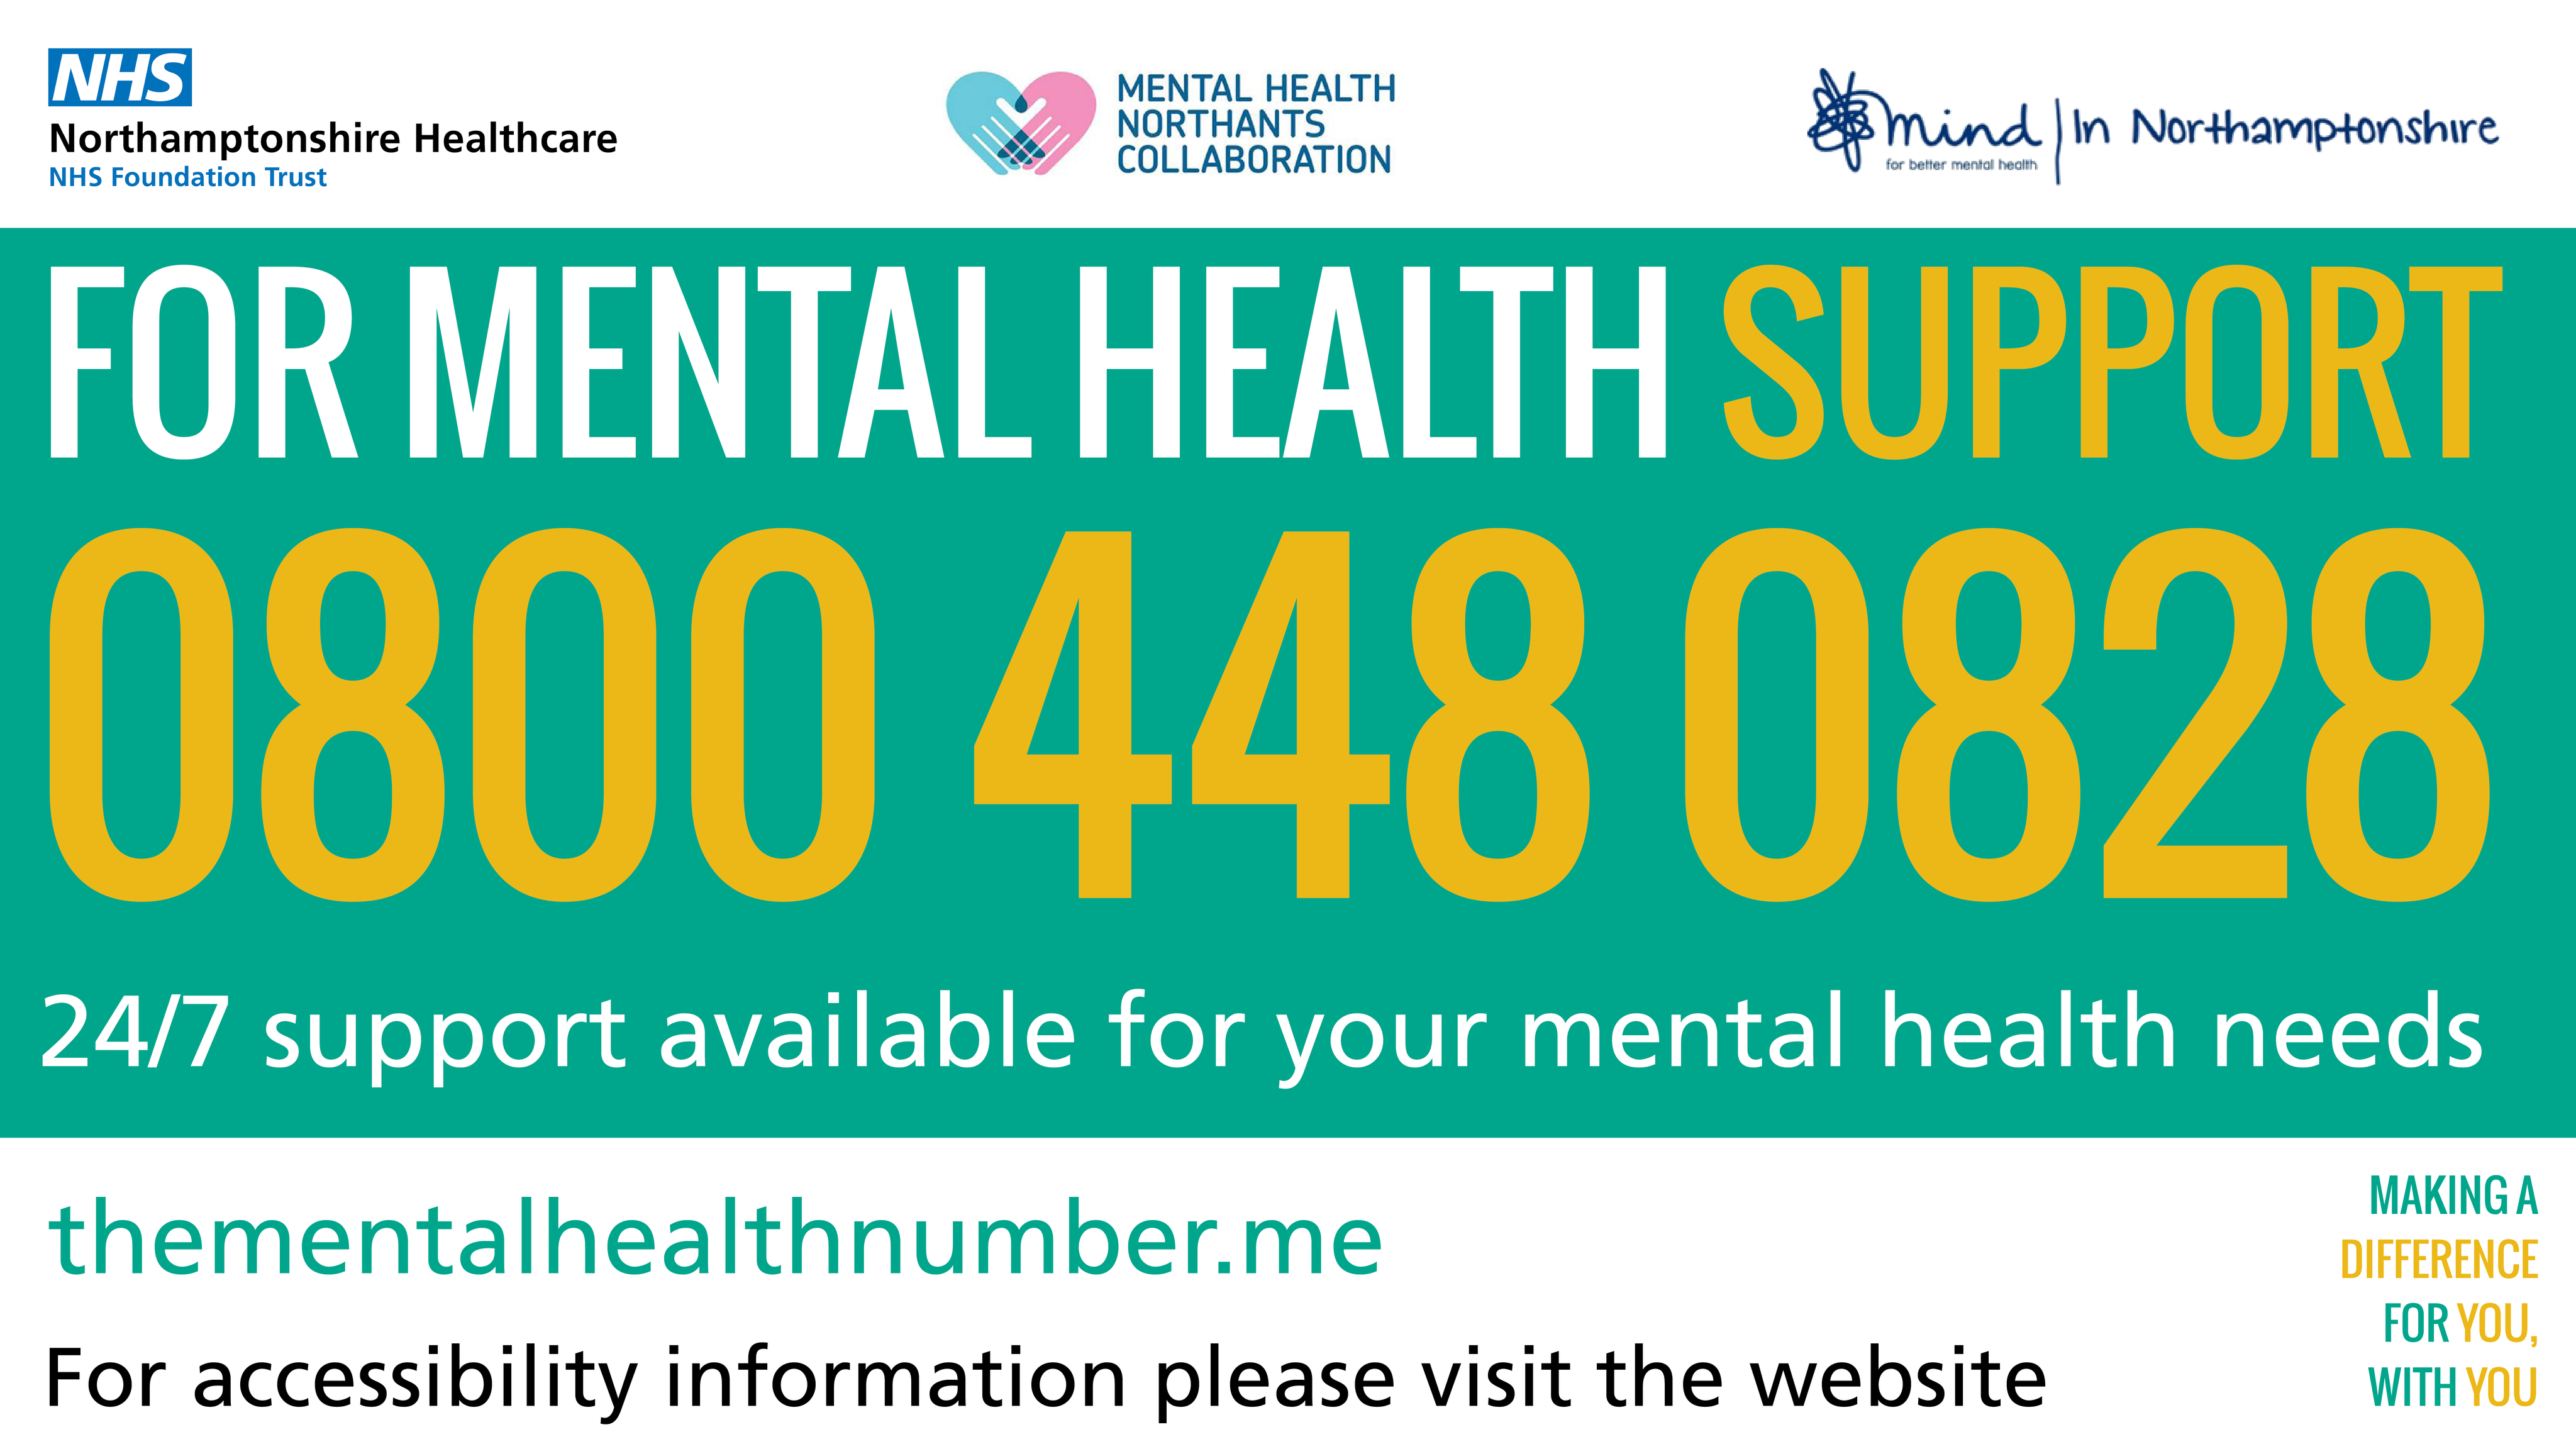 0800 448 0828 24/7 support available for your mental health needs. thementalhealthnumber.me